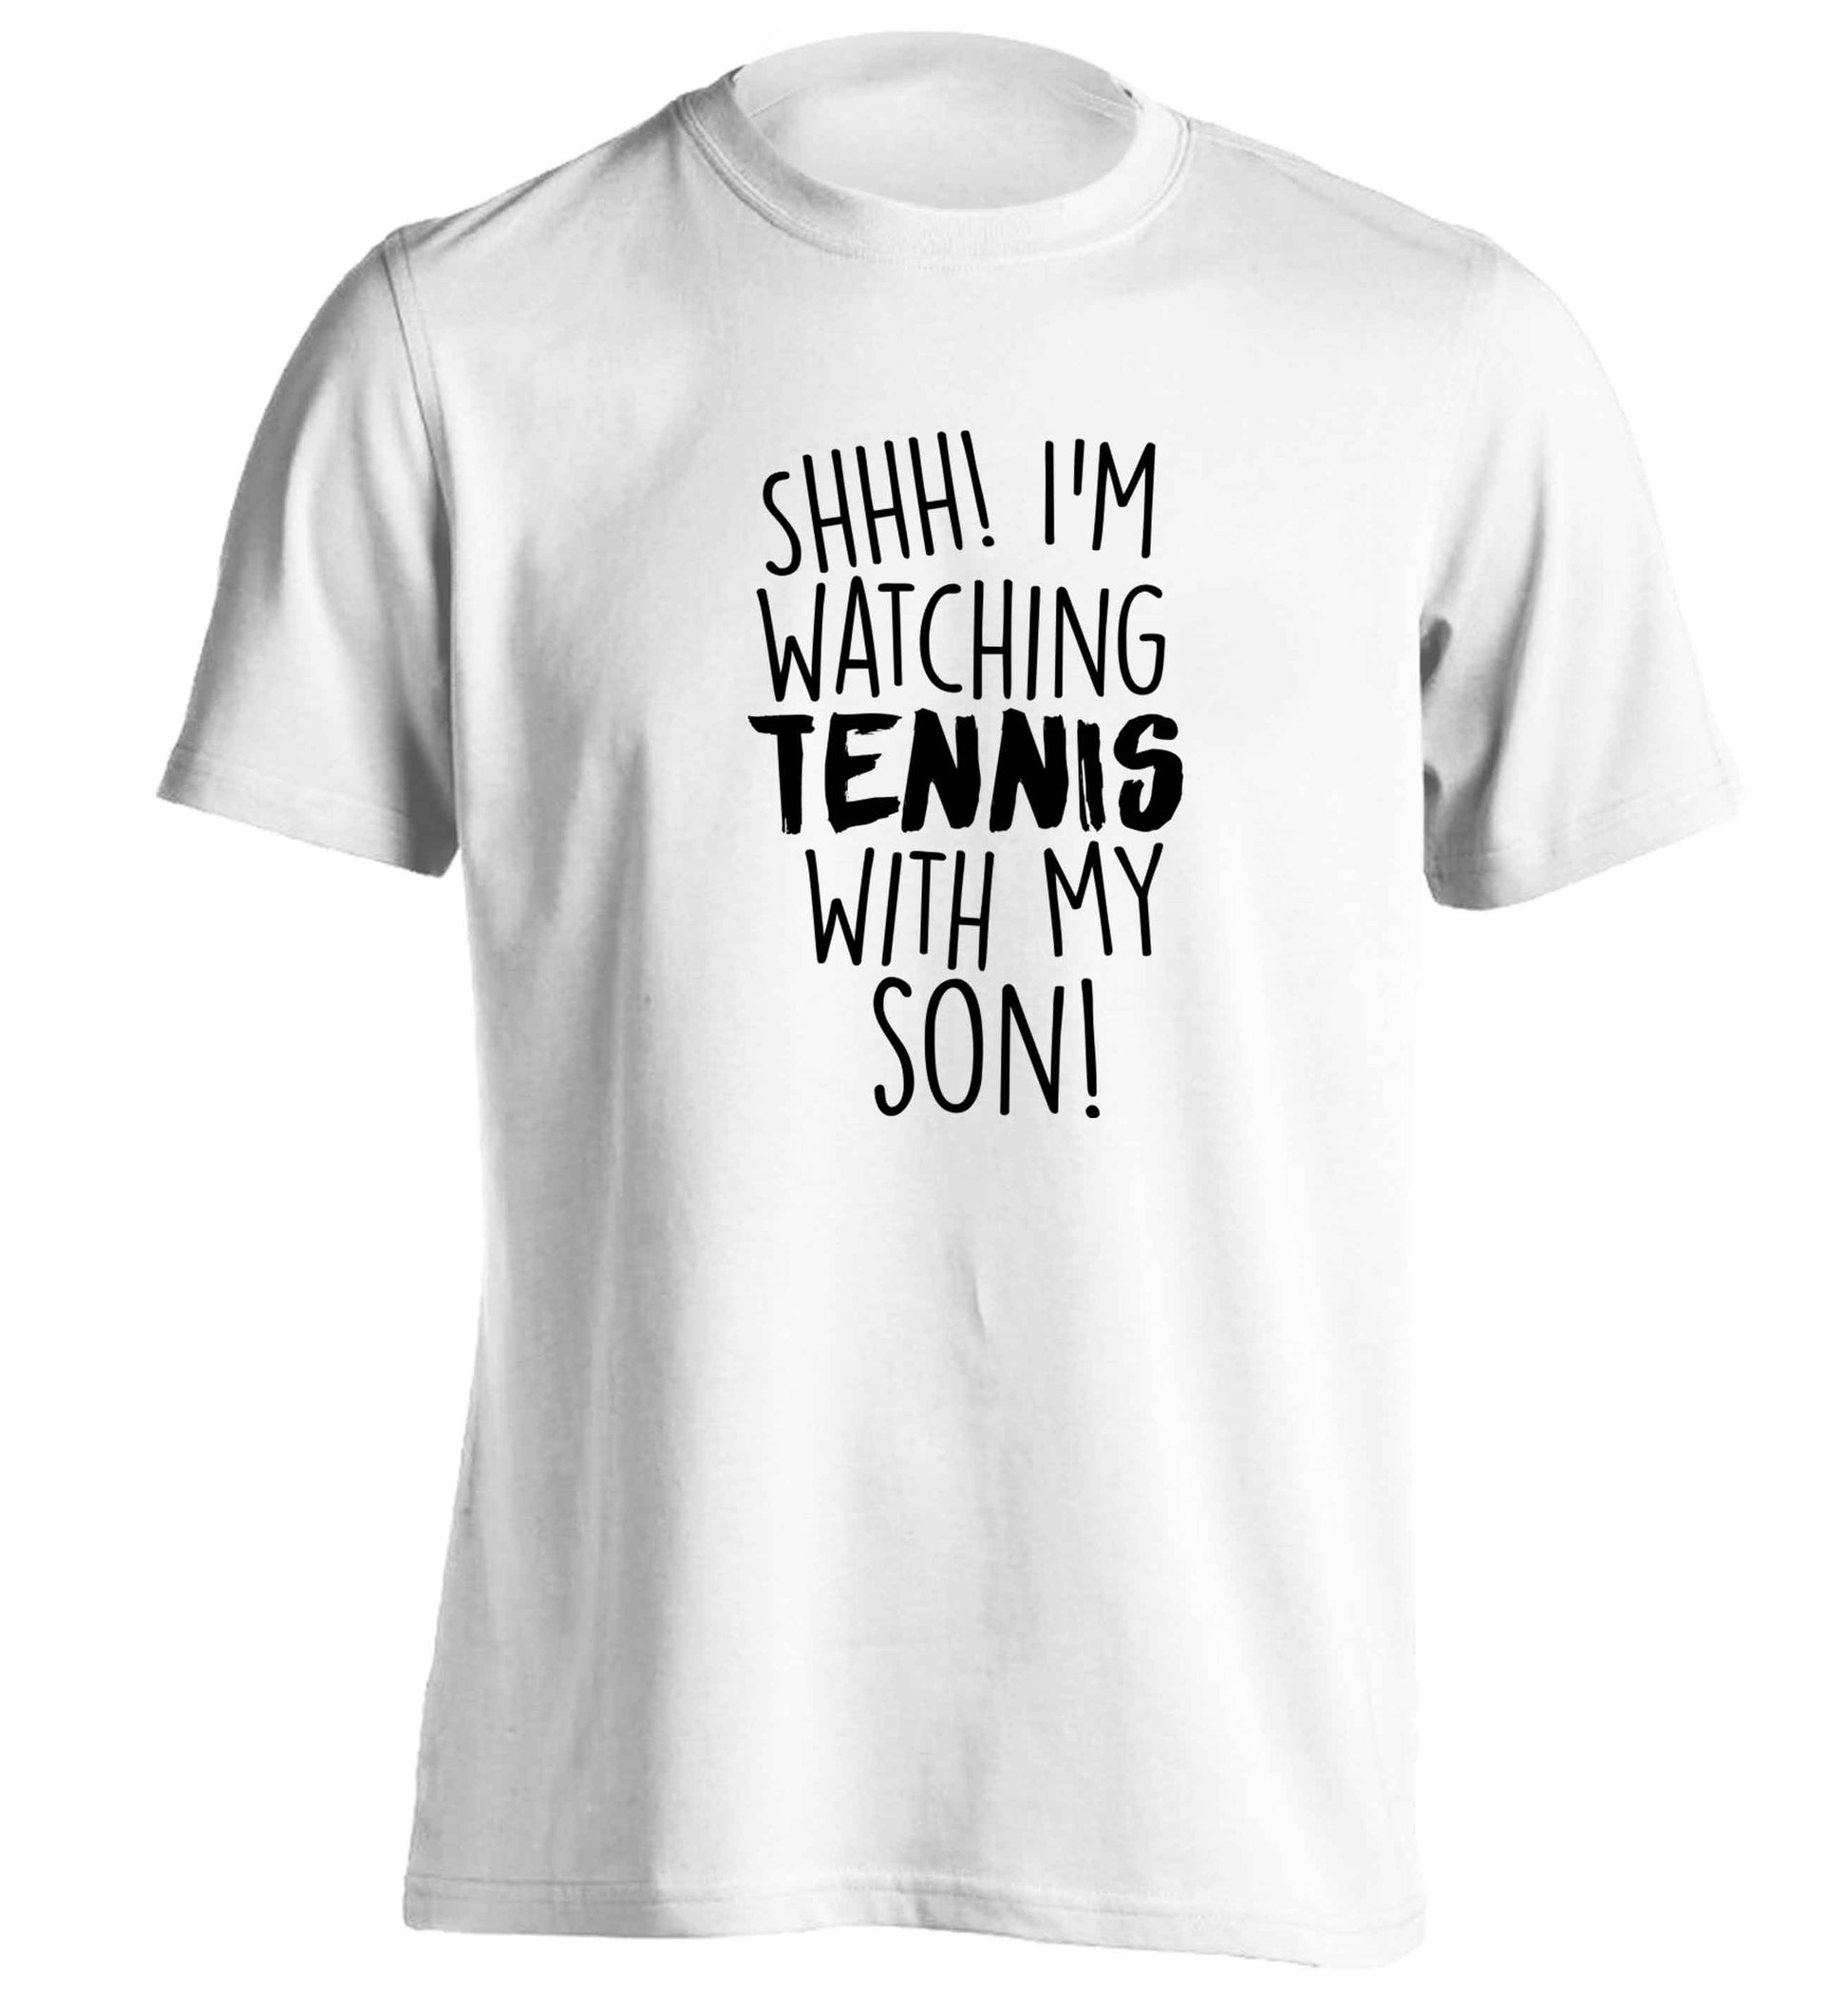 Shh! I'm watching tennis with my son! adults unisex white Tshirt 2XL